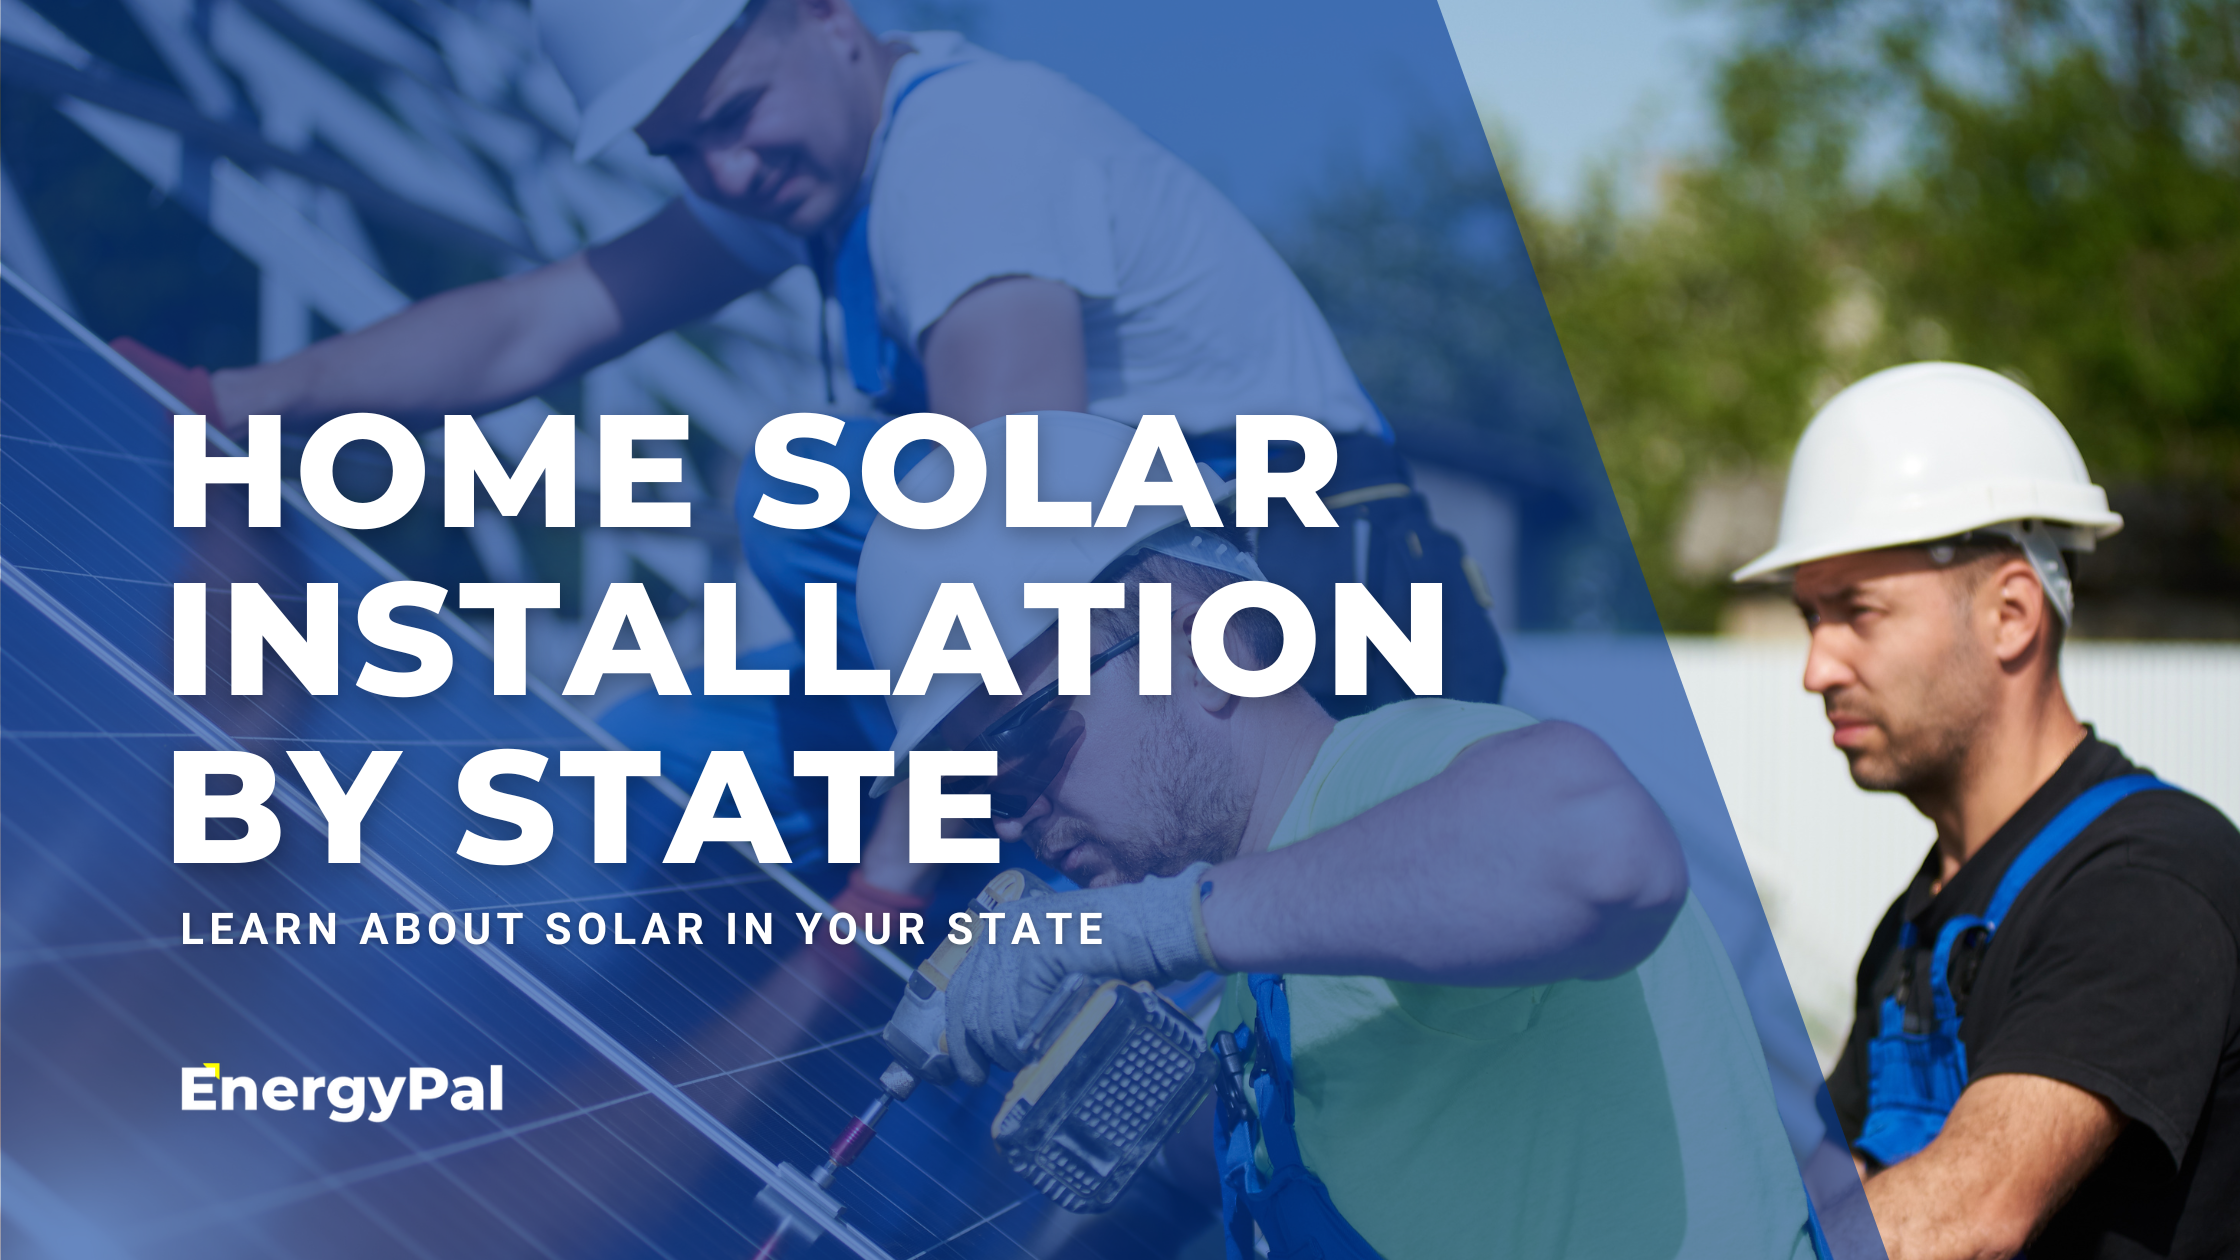 Home solar installation by state